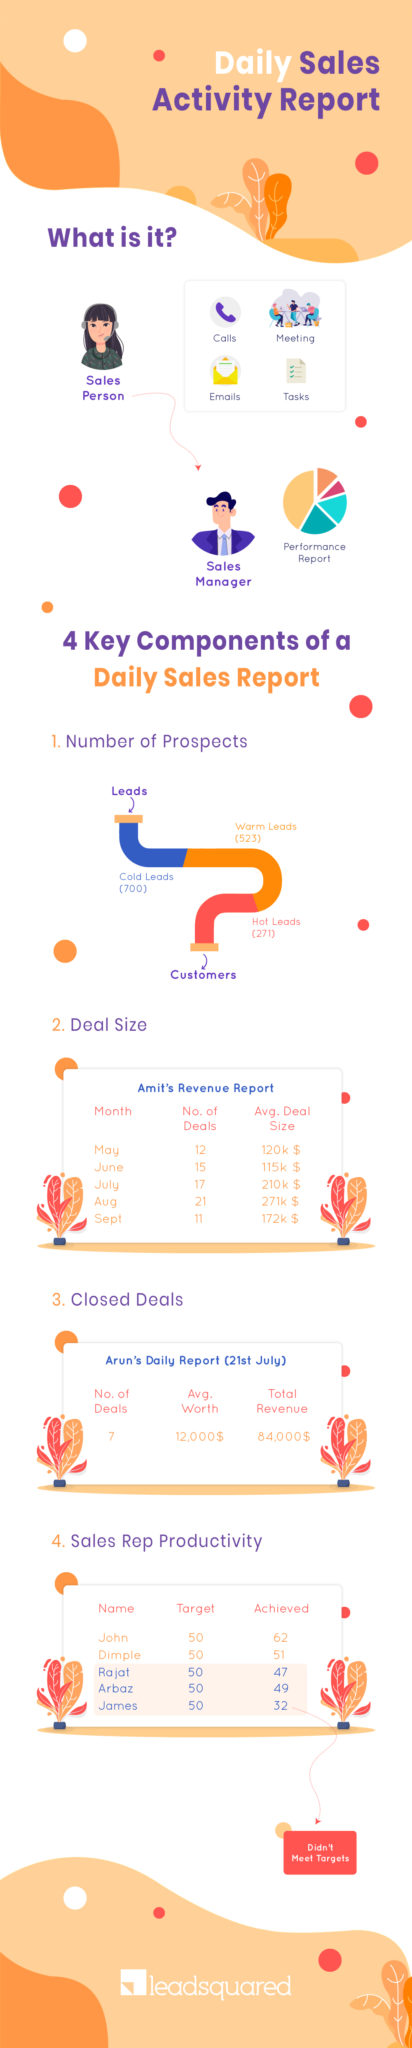 Daily sales activity report - infographic